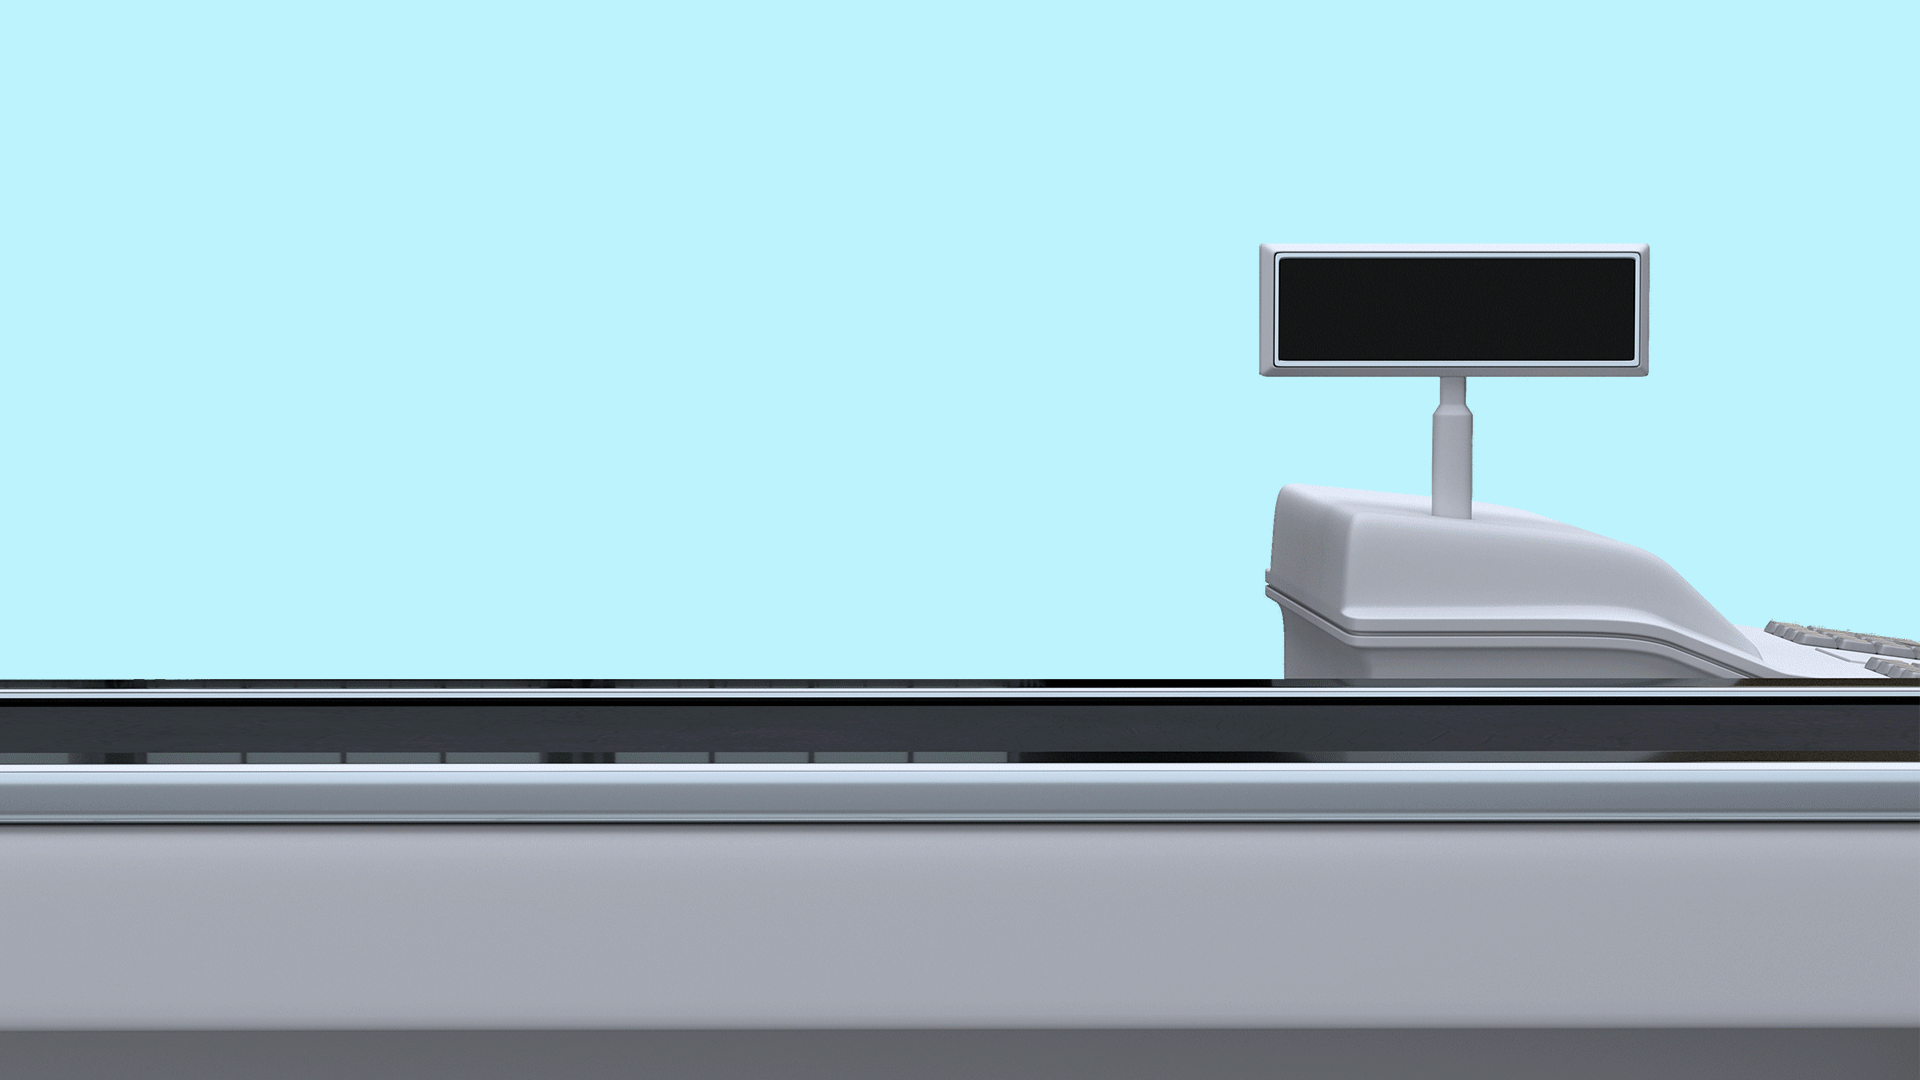 Animated gif of a house going down a supermarket checkout conveyor belt